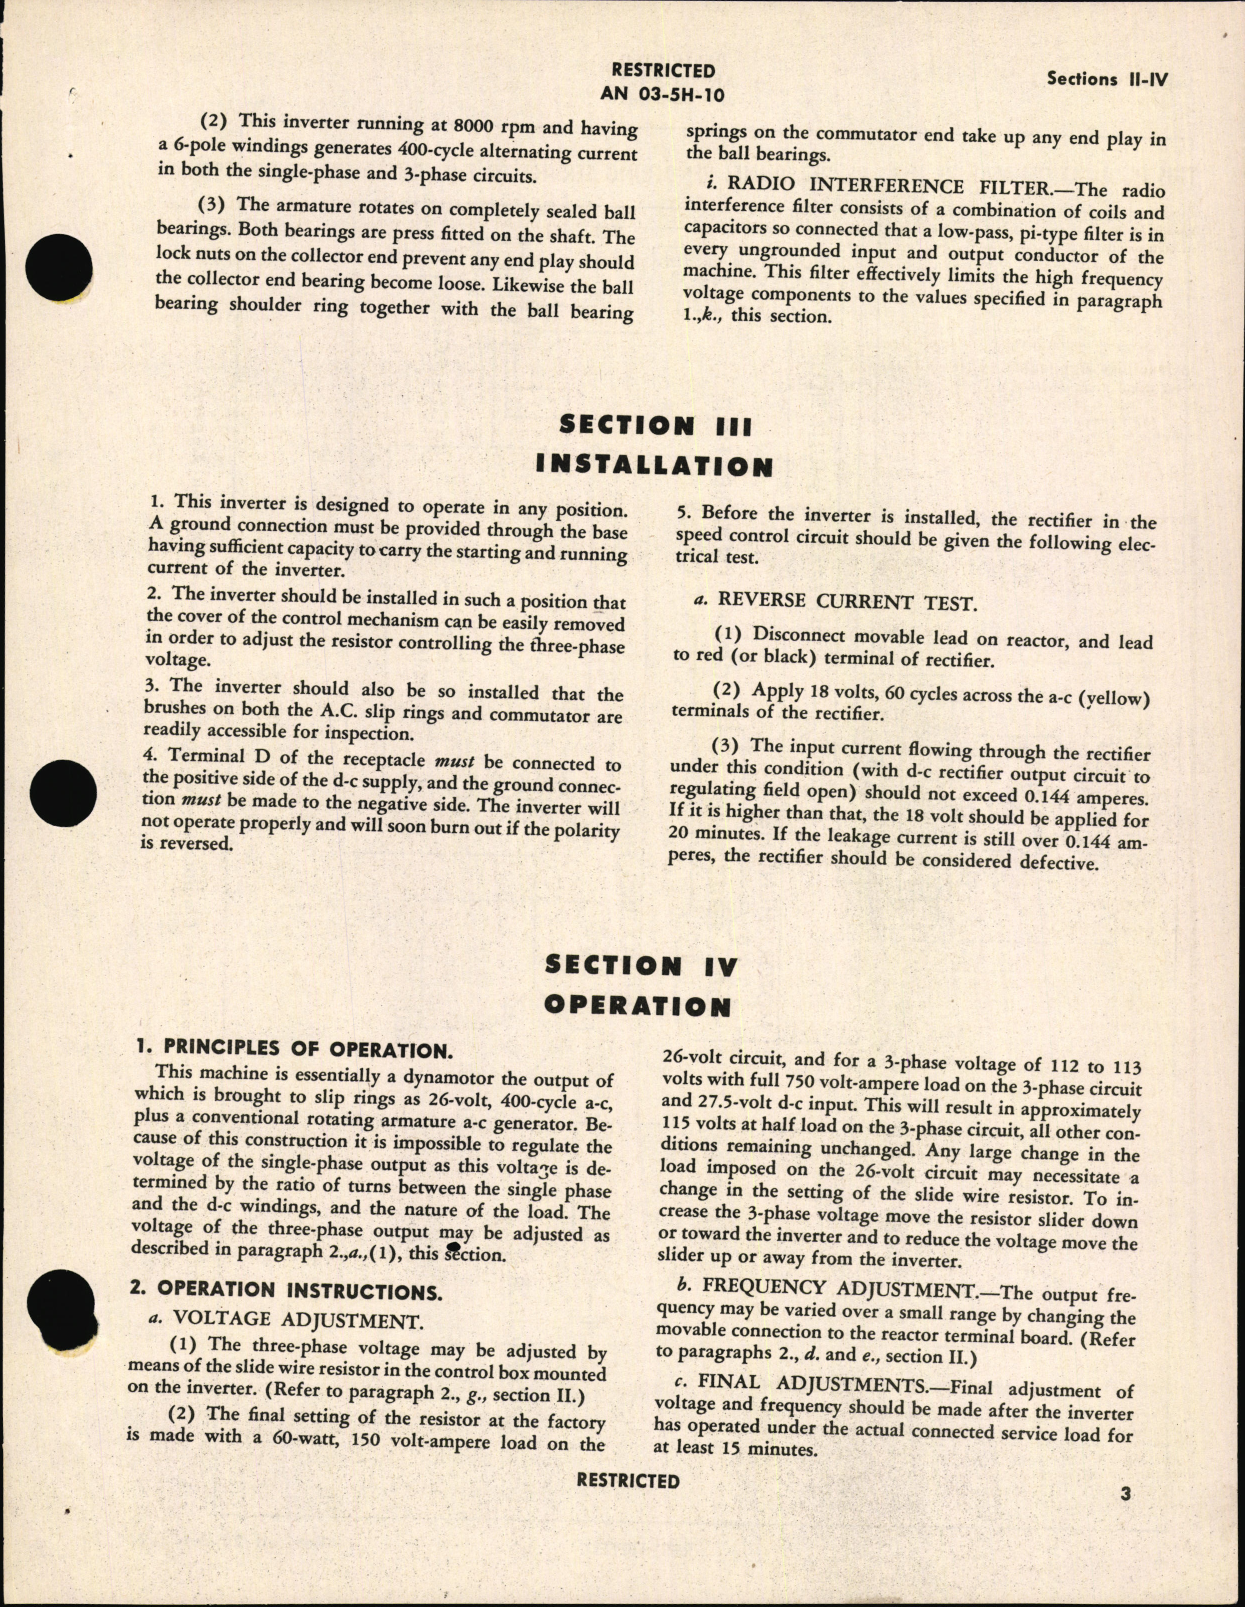 Sample page 7 from AirCorps Library document: Operation, Service & Overhaul Instructions with Parts Catalog for Inverter Type MG-153F (R88-I-4220)